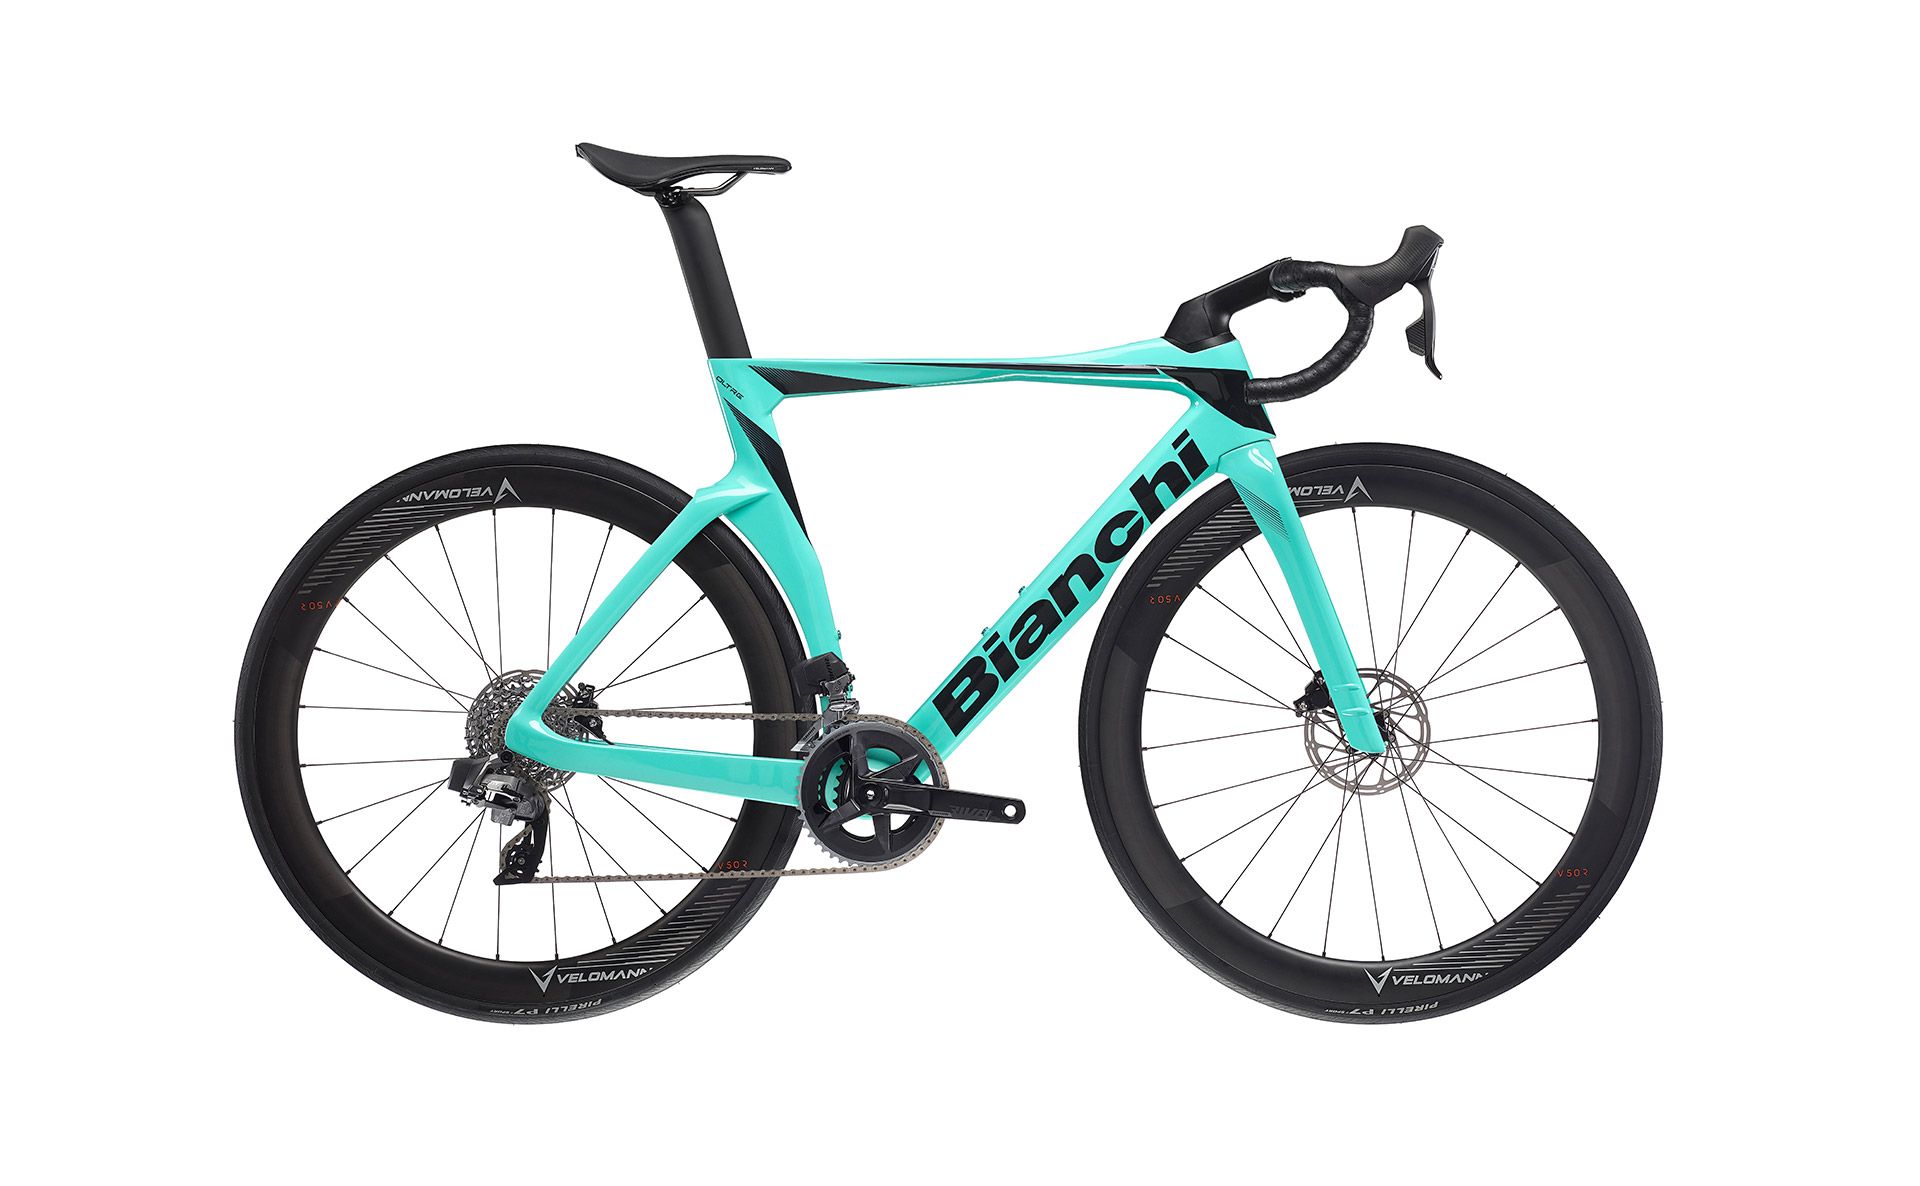 Bianchi Oltre Comp Rival AXS 12SP CK16/Graphite Full Glossy 